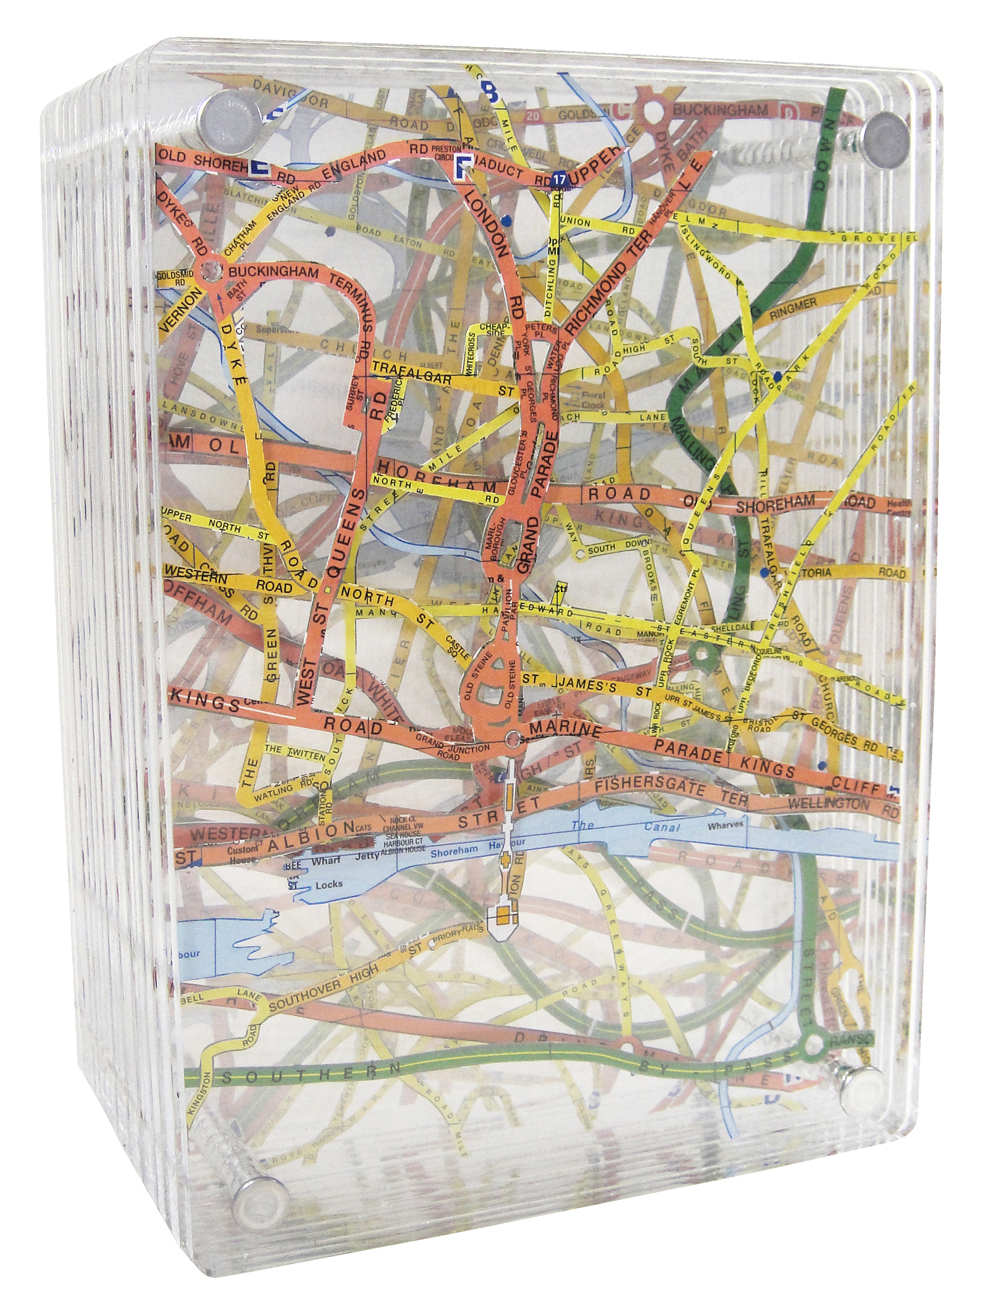 Carousel, 2019, Excavated Vintage Map, Acrylic, and Metal, 7.75Hx5.5Wx3.75D